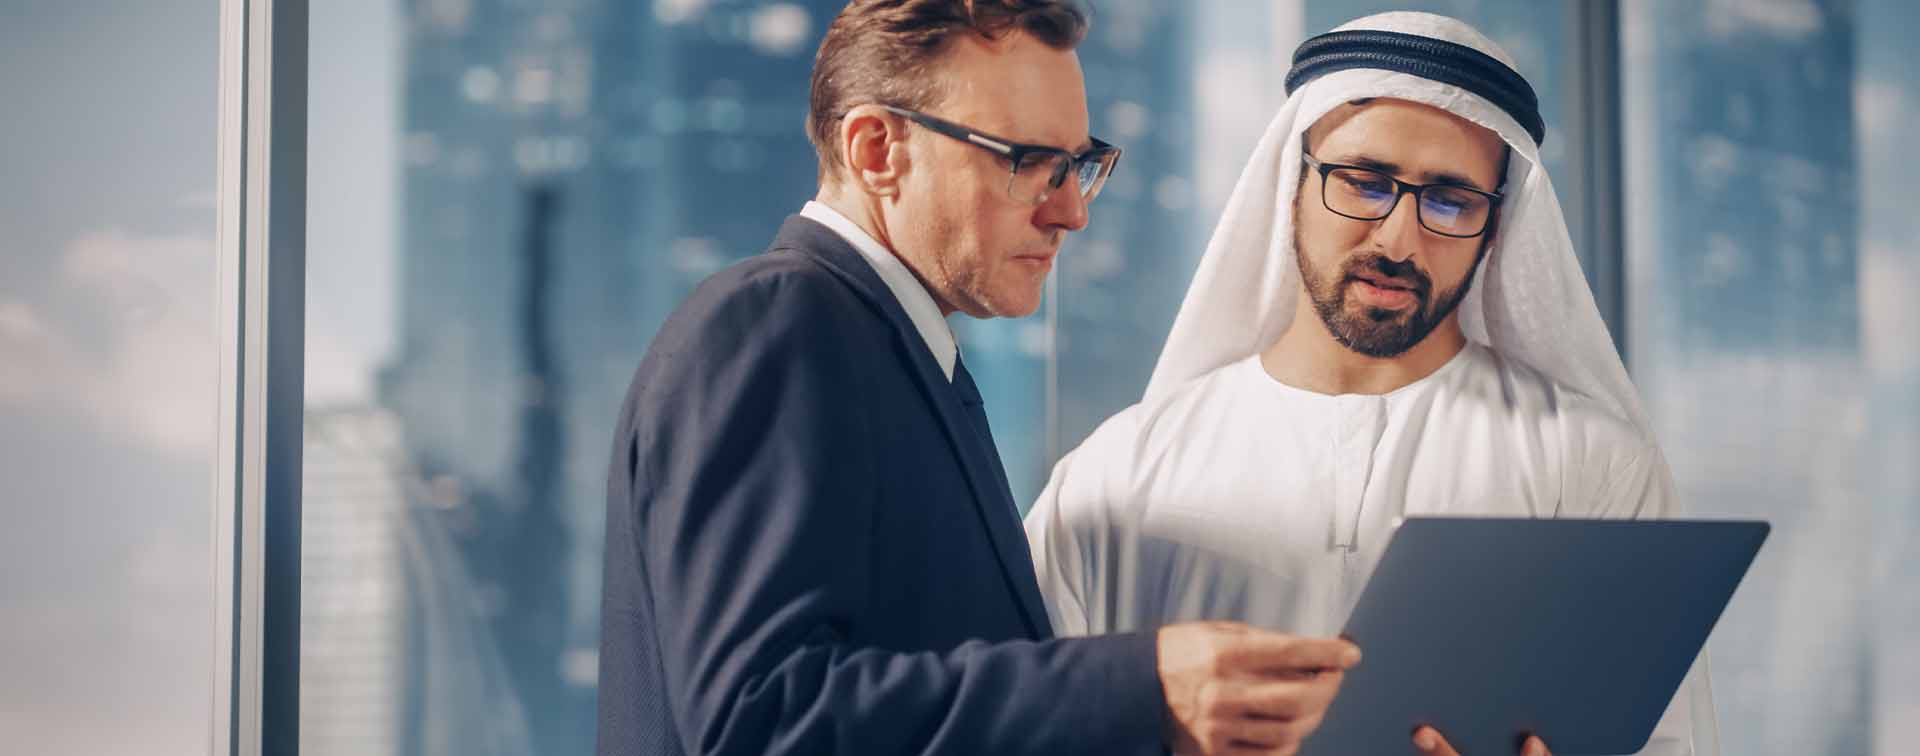 US businessman in suit meeting Emirati business partner in traditional kandura standing in modern office, looking at laptop